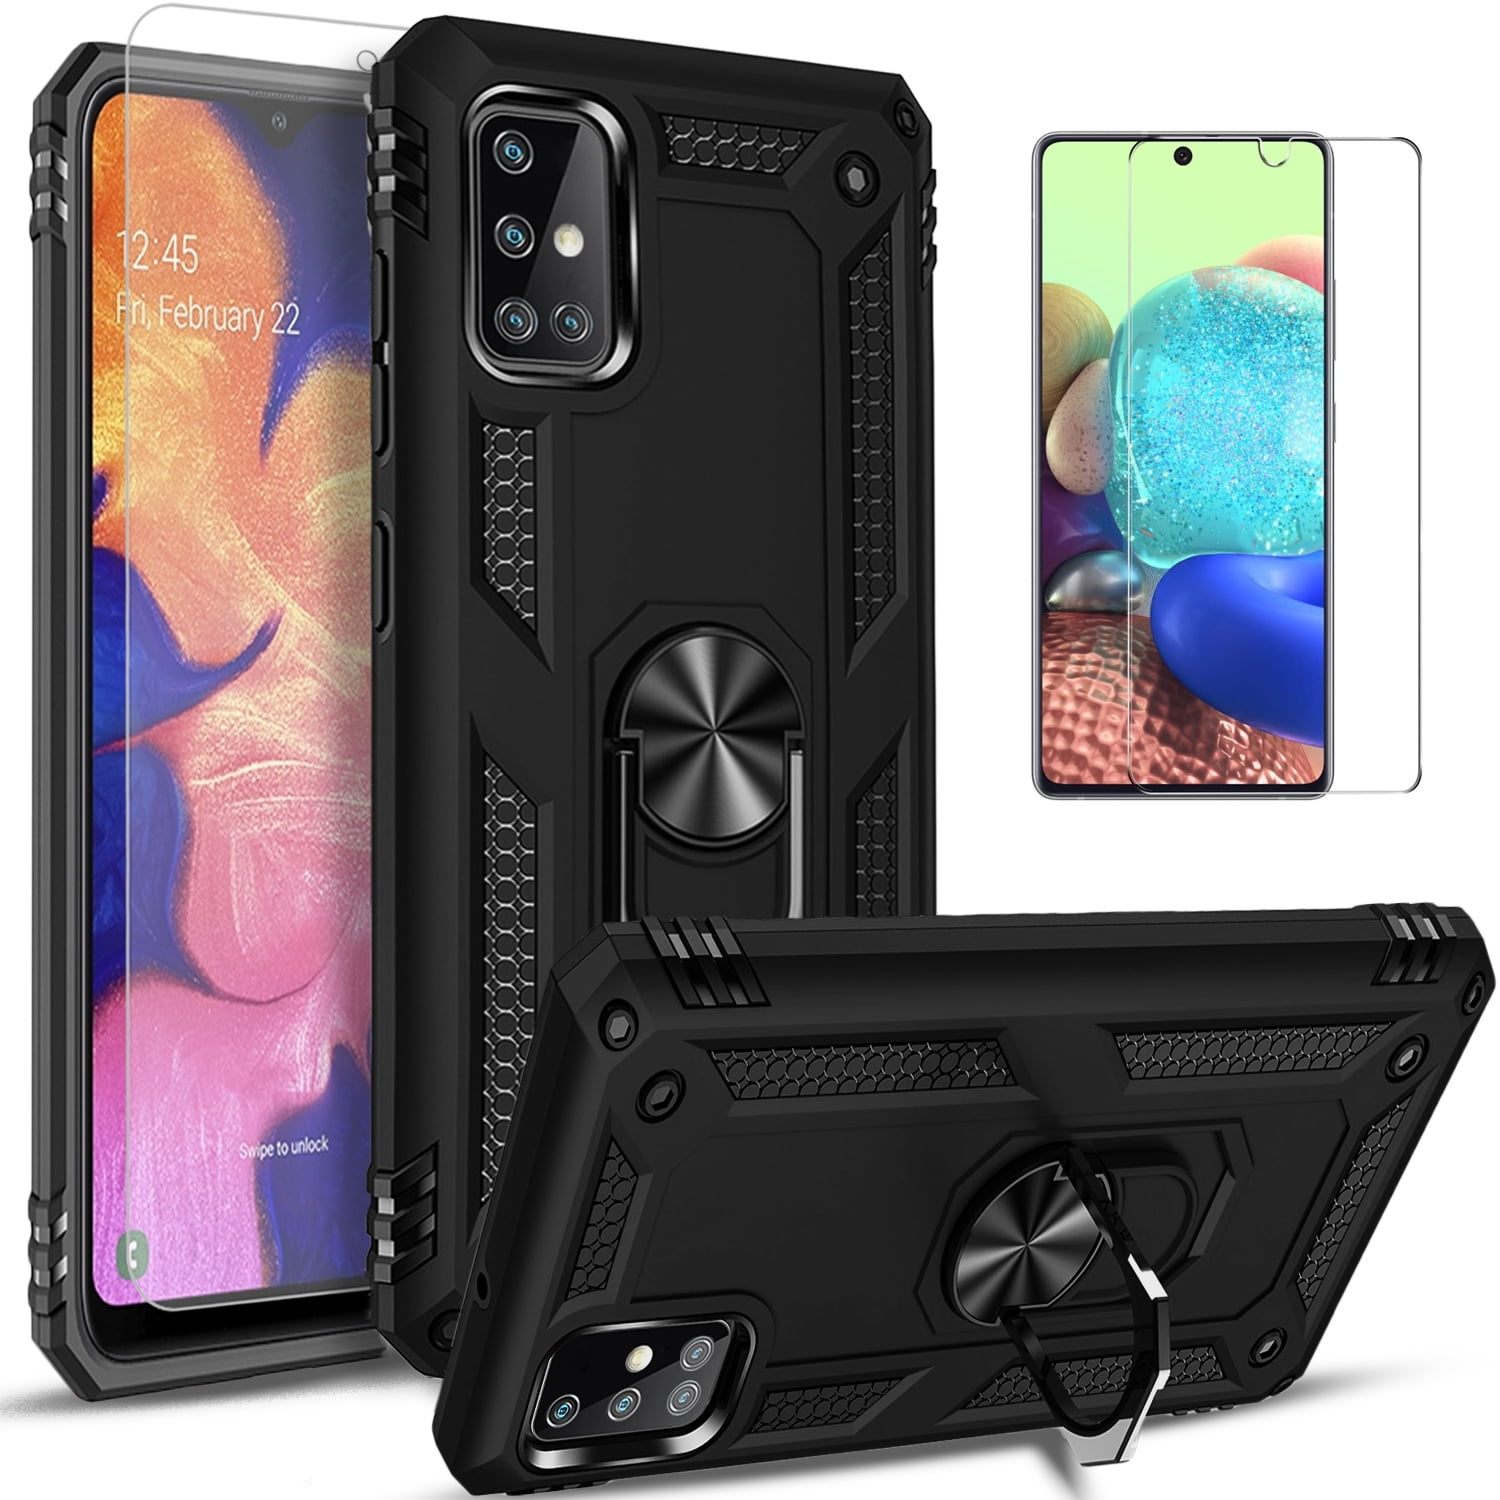 Samsung Galaxy A71 5G Case, With [Tempered Glass Screen Protector Included], STARSHOP Drop Protection Ring Kickstand Cover- Black